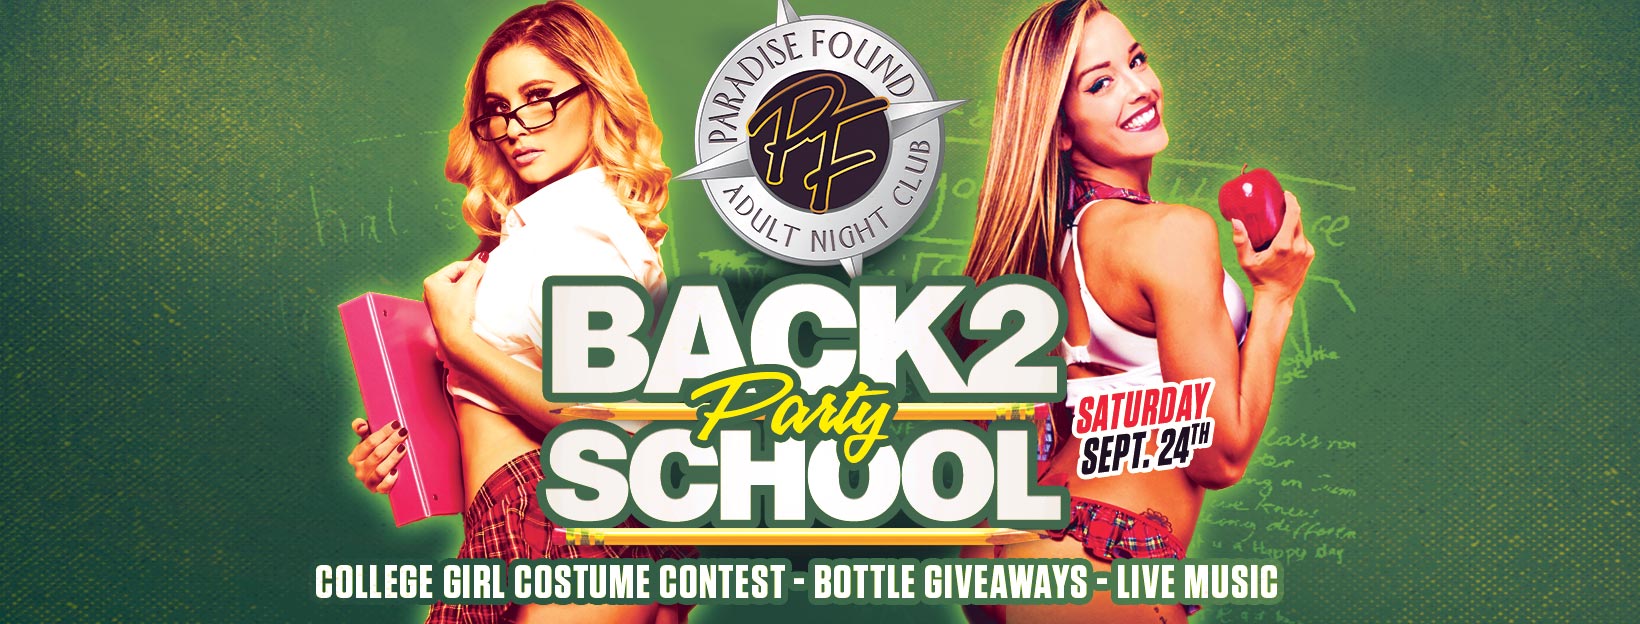 Back to School Party at Club Paradise Found Sept. 24th